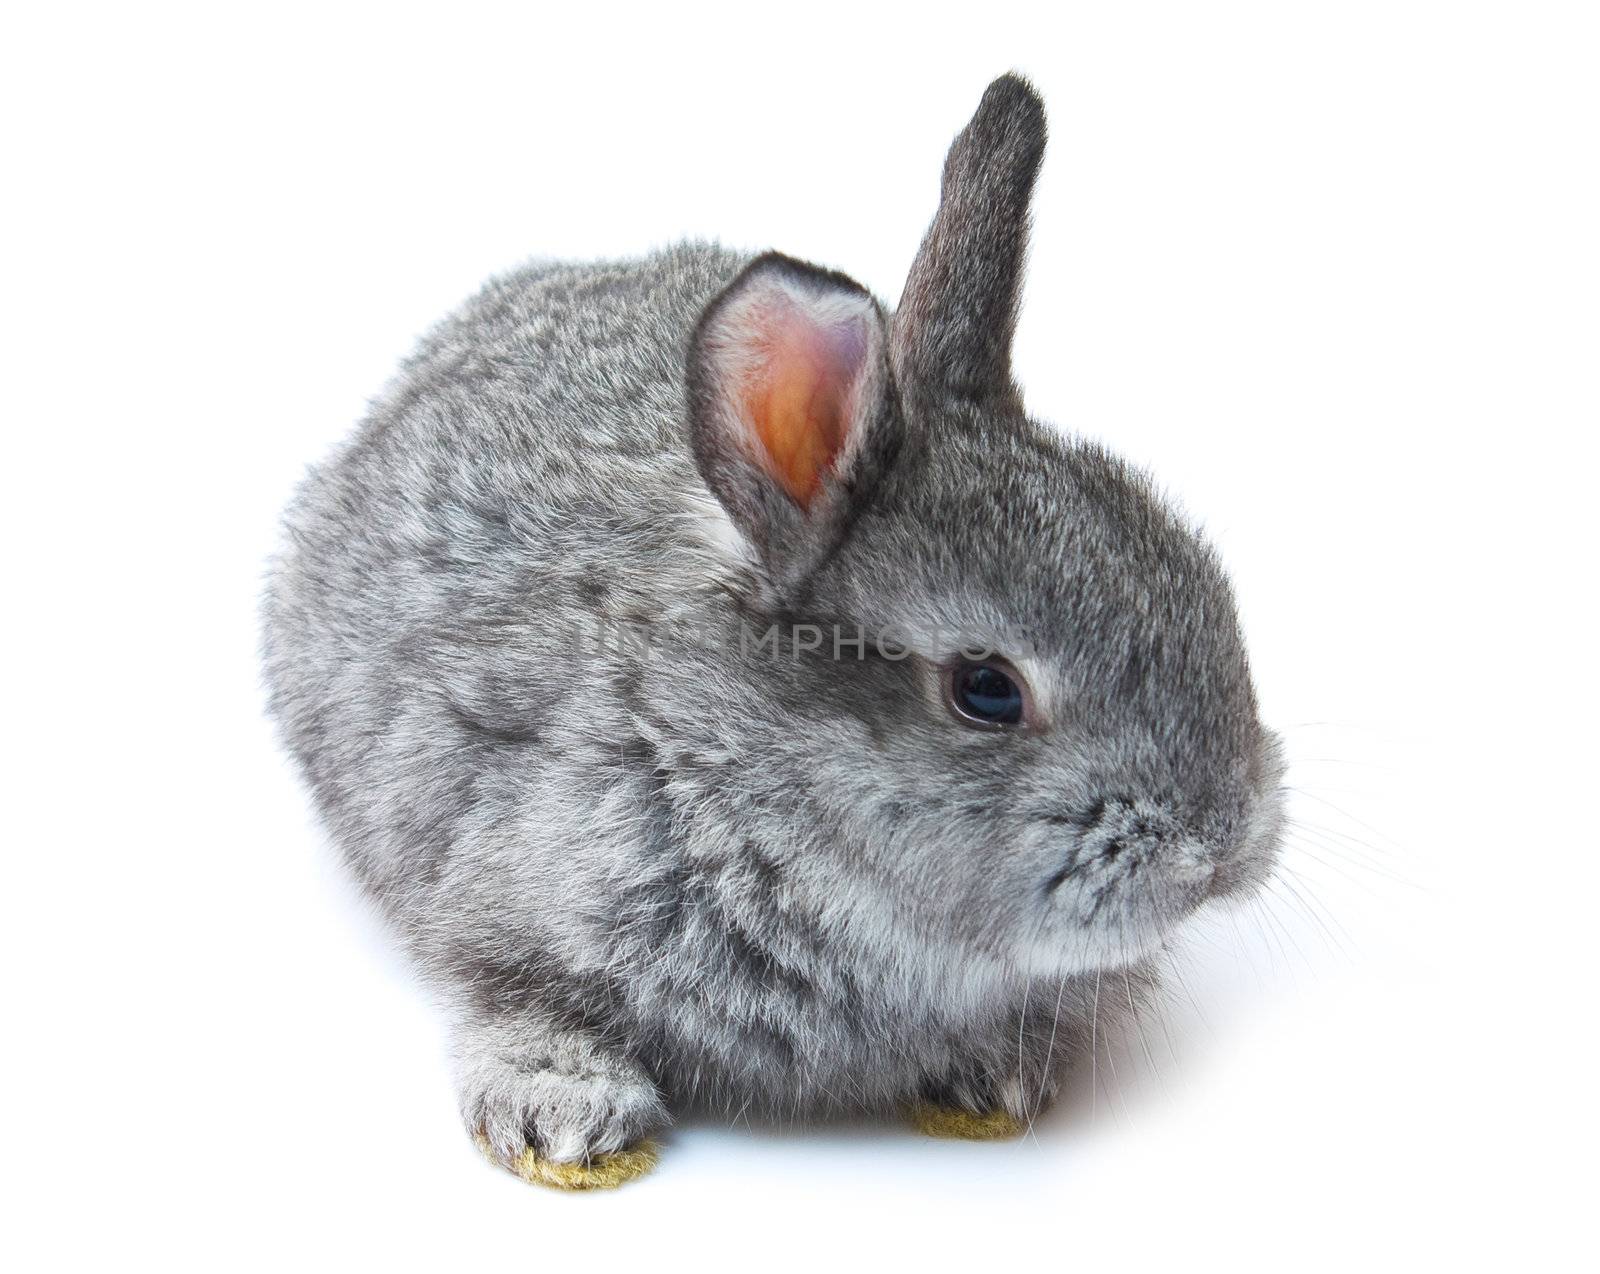 Happy New Year of rabbit isolated on a white background